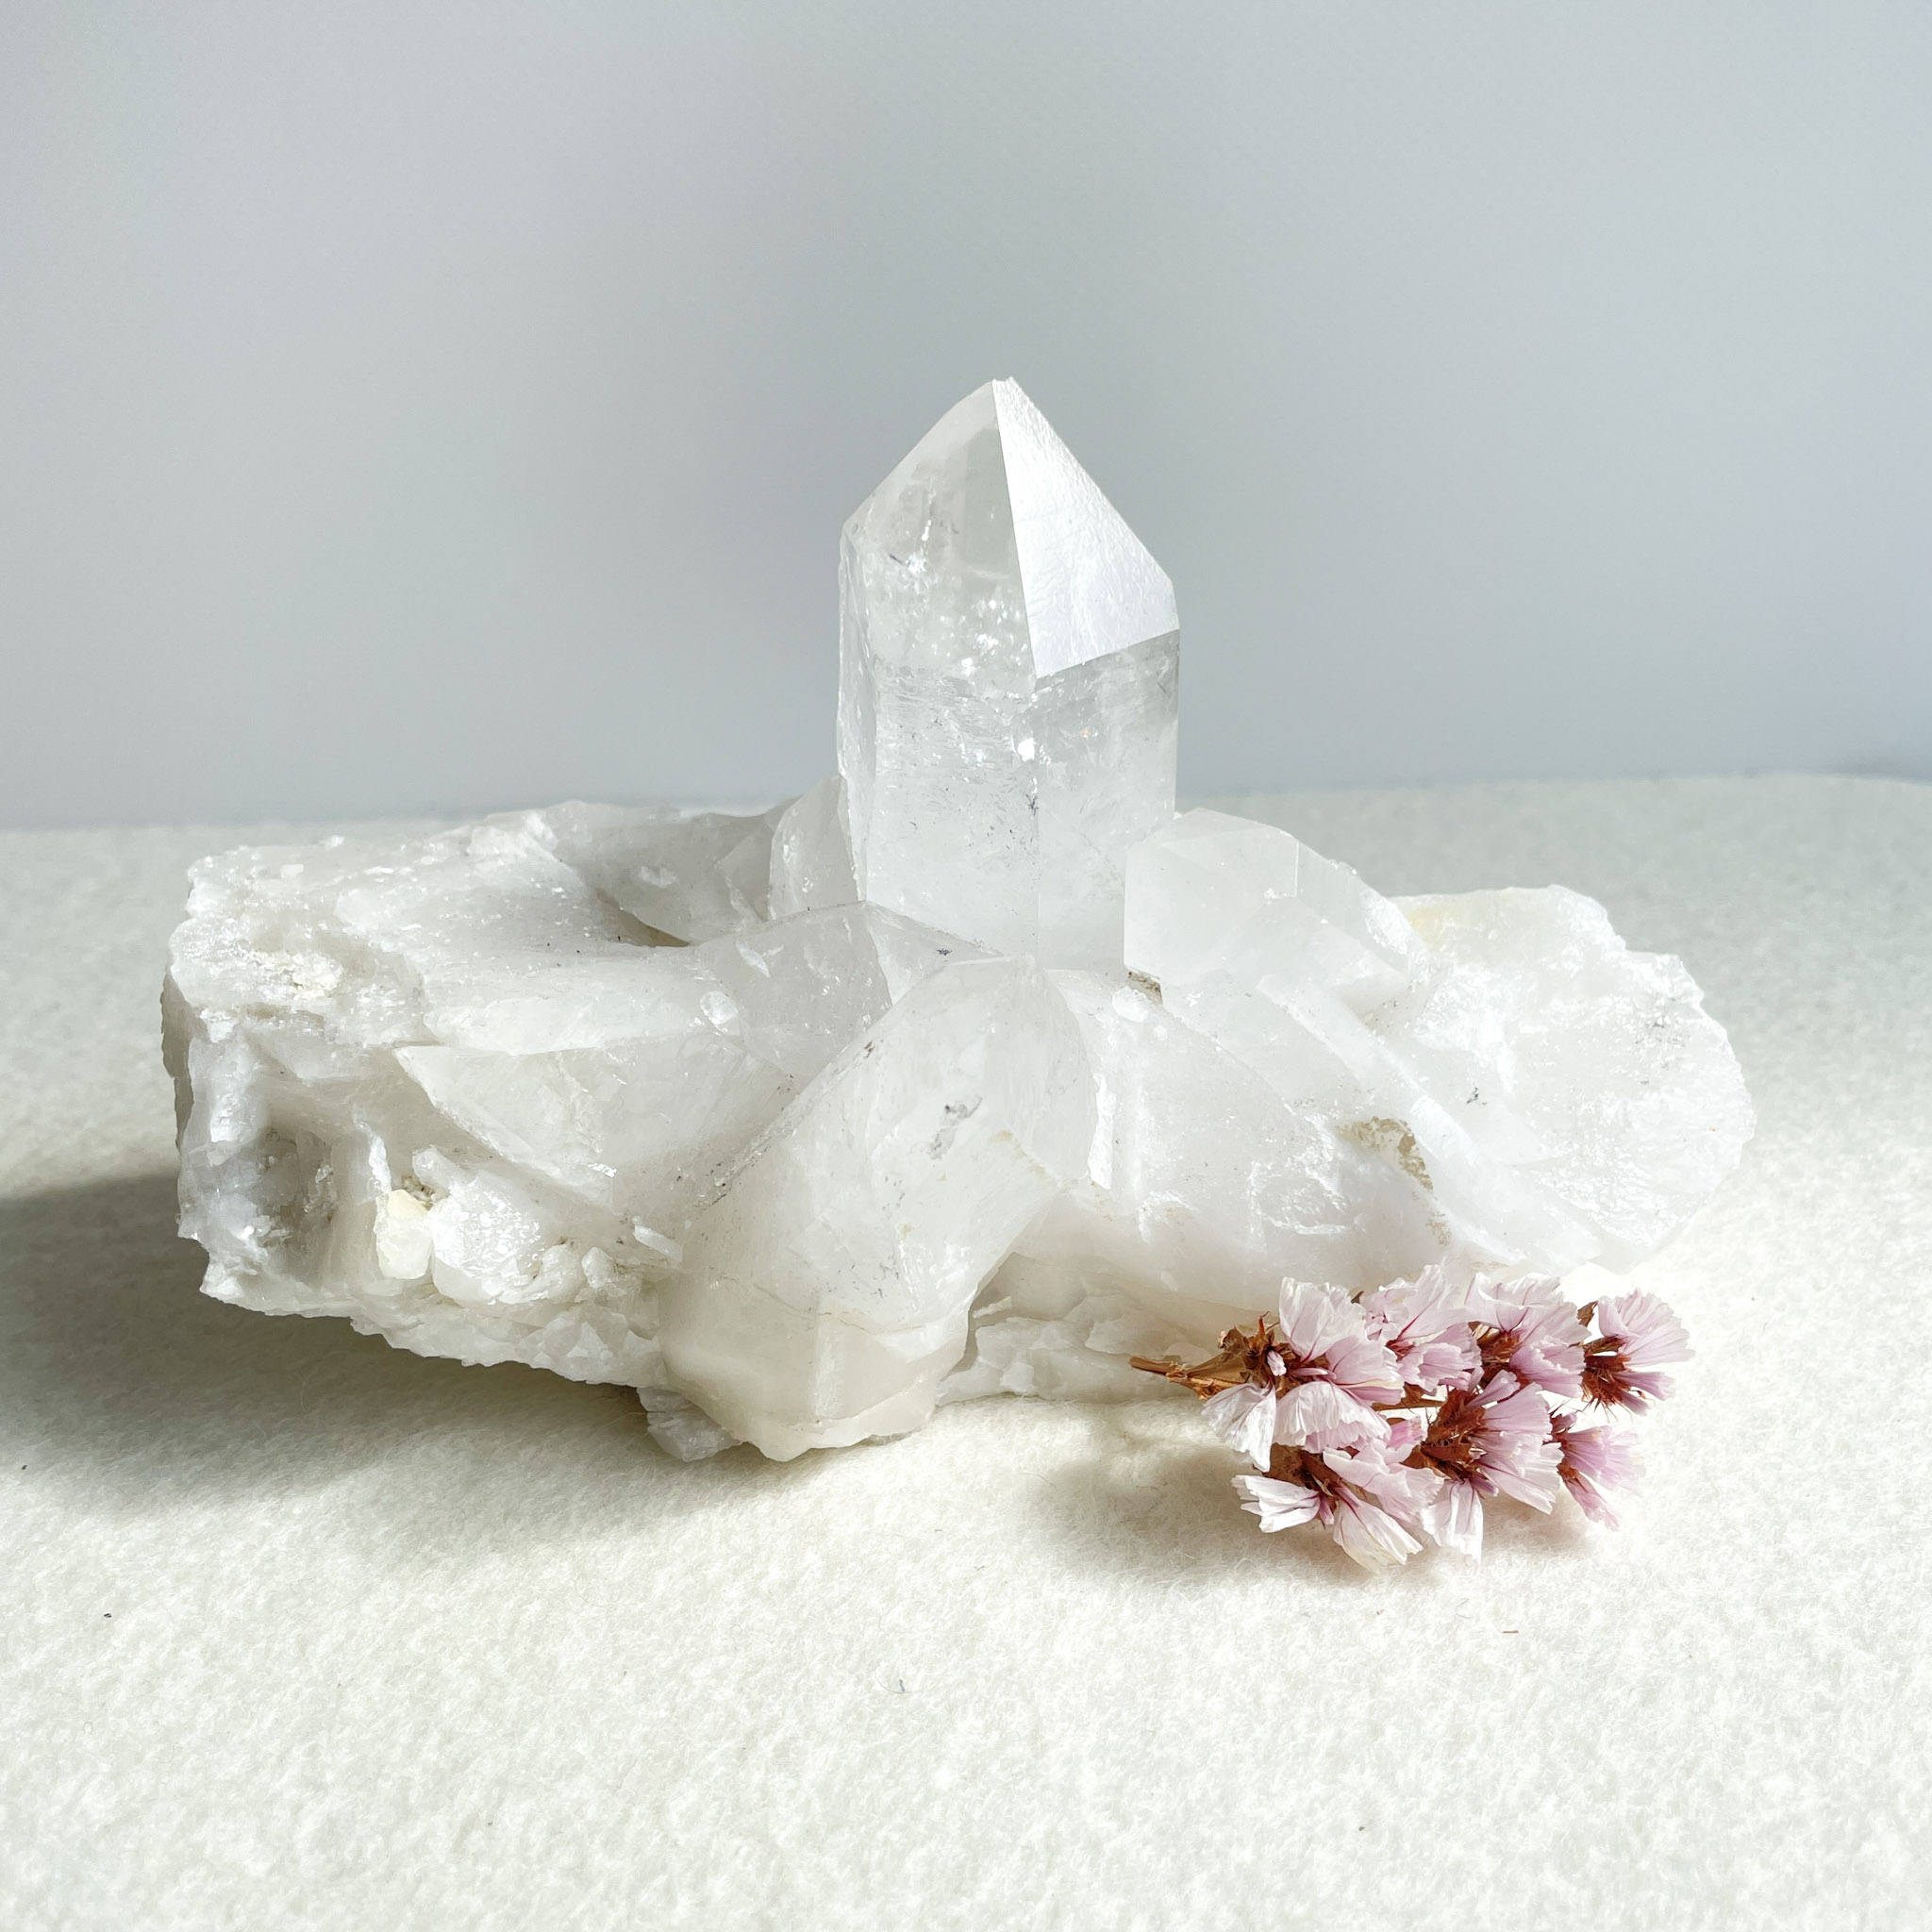 A cluster of clear quartz crystals with a prominent central point, accompanied by small pink blossoms on a white surface with a pale background.